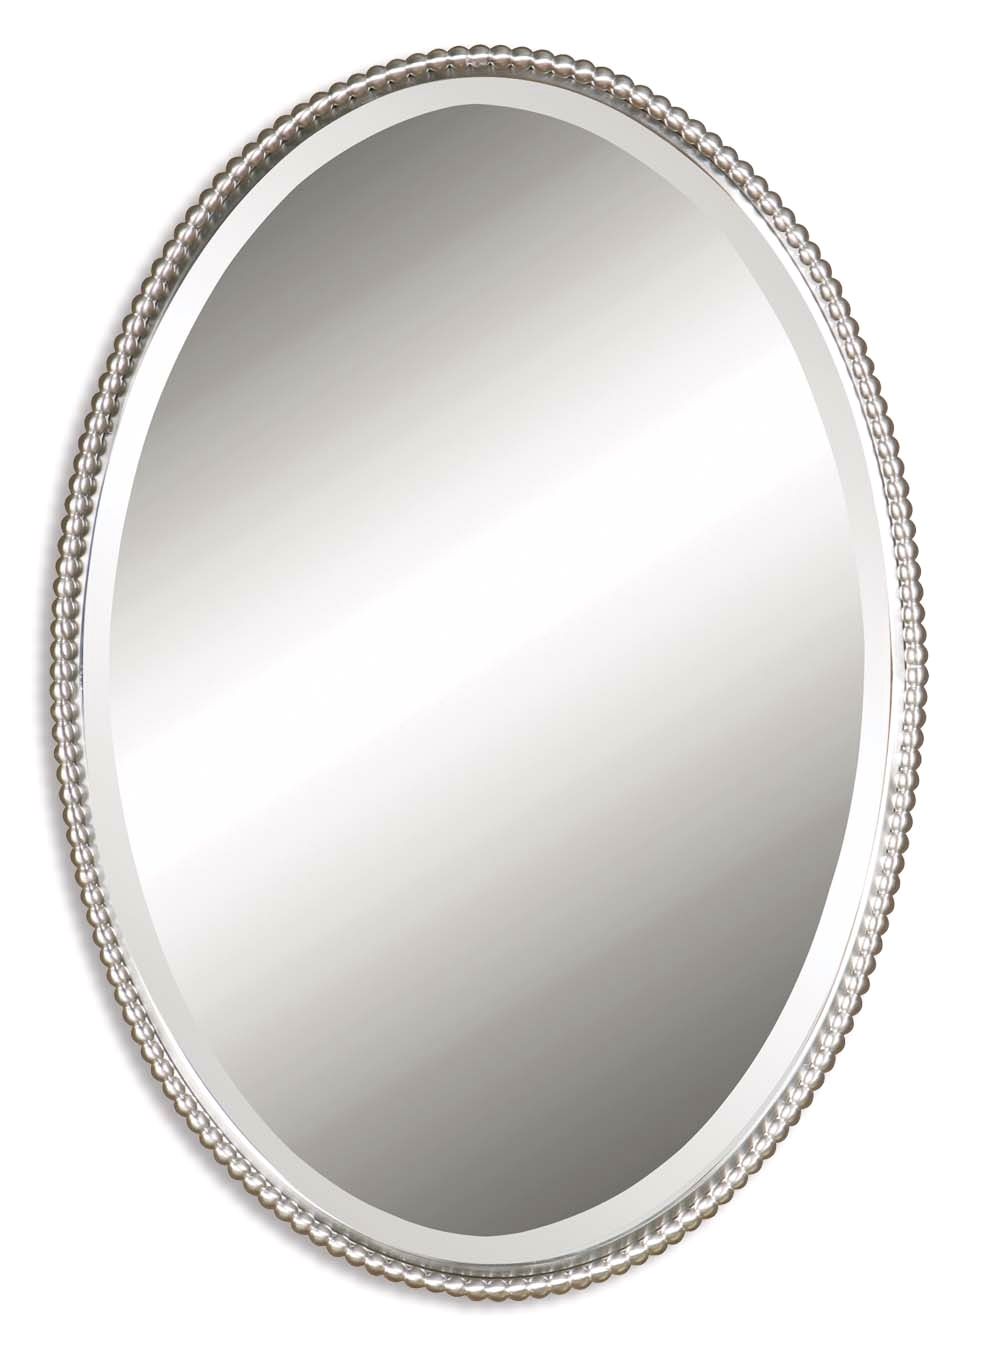 Sherise Modern Brushed Nickel Oval Mirror 01102 B In Nickel Floating Wall Mirrors (View 10 of 15)